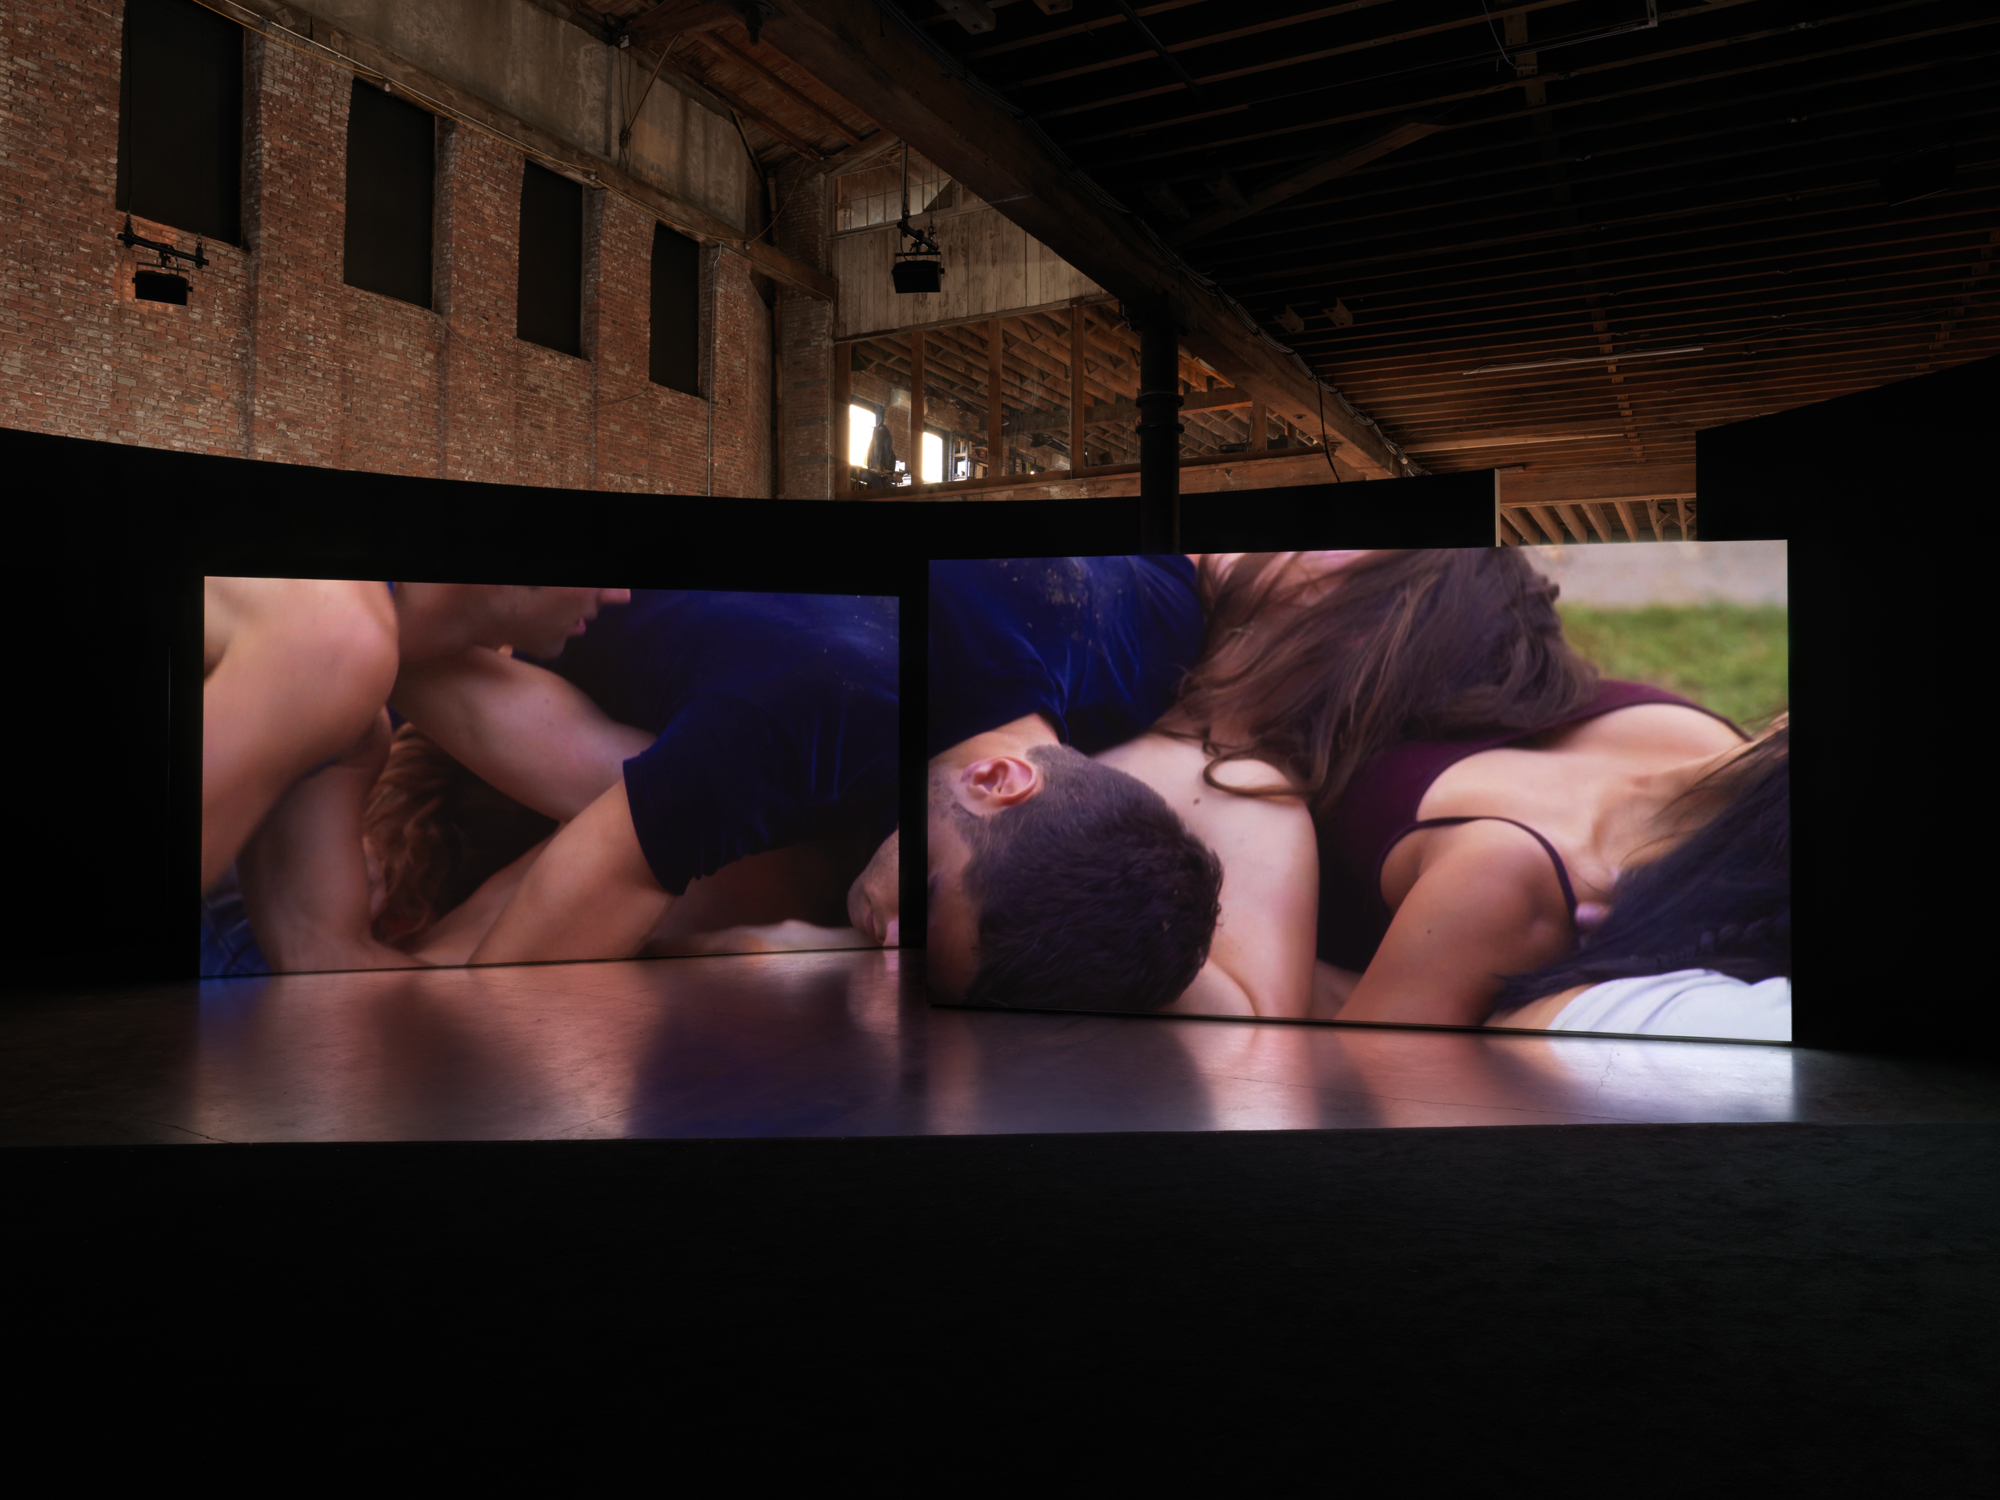 Two large projects of dancers whose bodies writhe together are projected into two synchronized video channels.